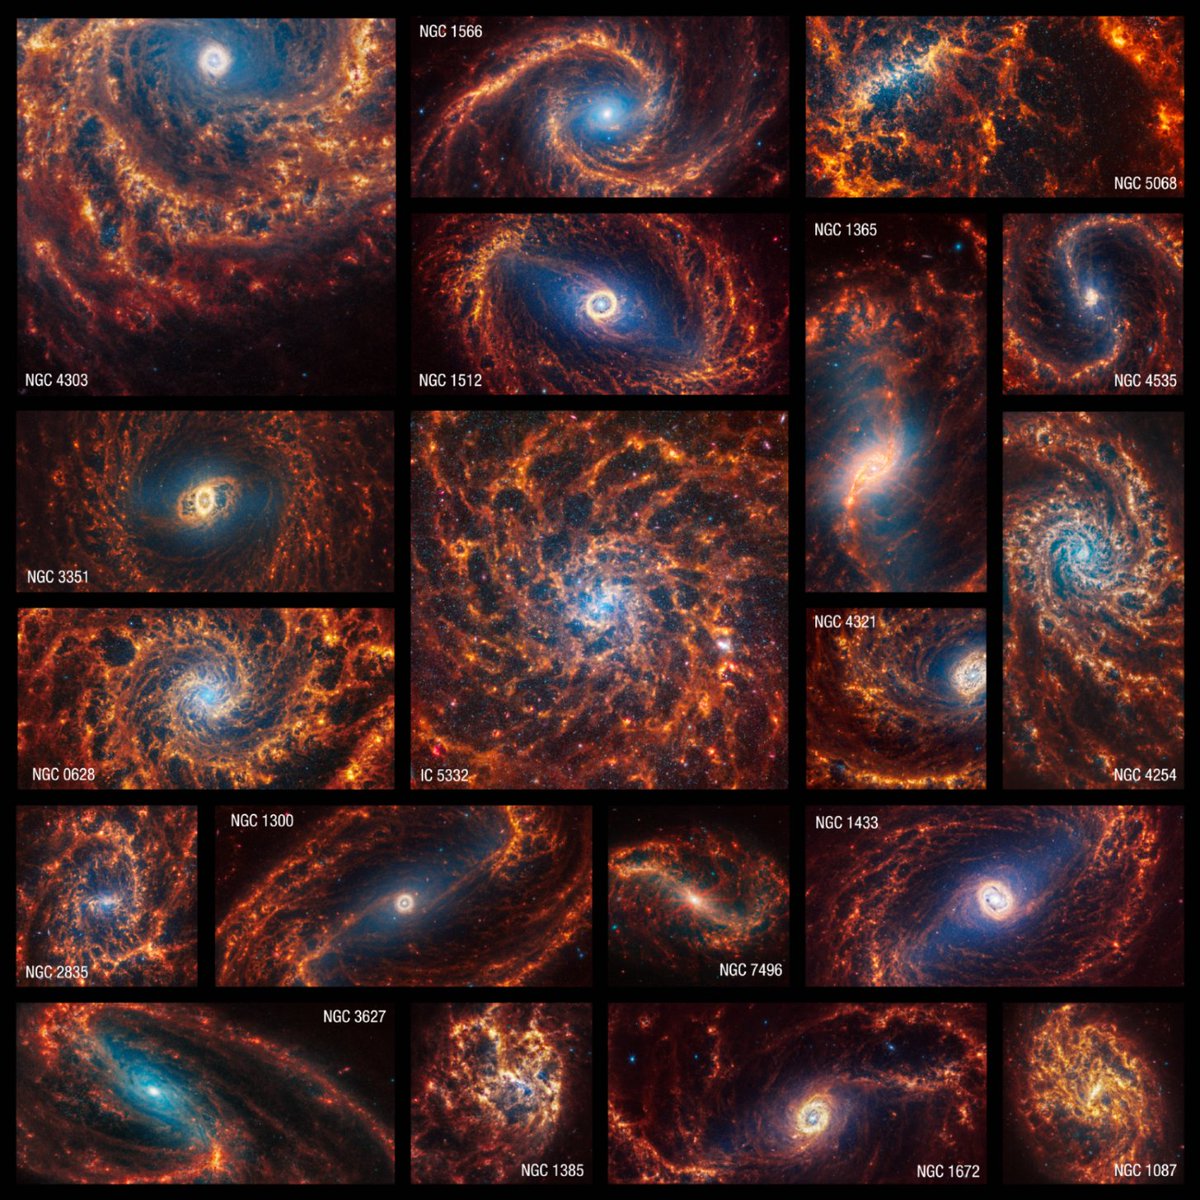 Go on, give these a whirl. Webb just released highly detailed images of 19 spiral galaxies! These observations add new near and mid-infrared puzzle pieces to the PHANGS program, a worldwide astronomy project: science.nasa.gov/missions/webb/…